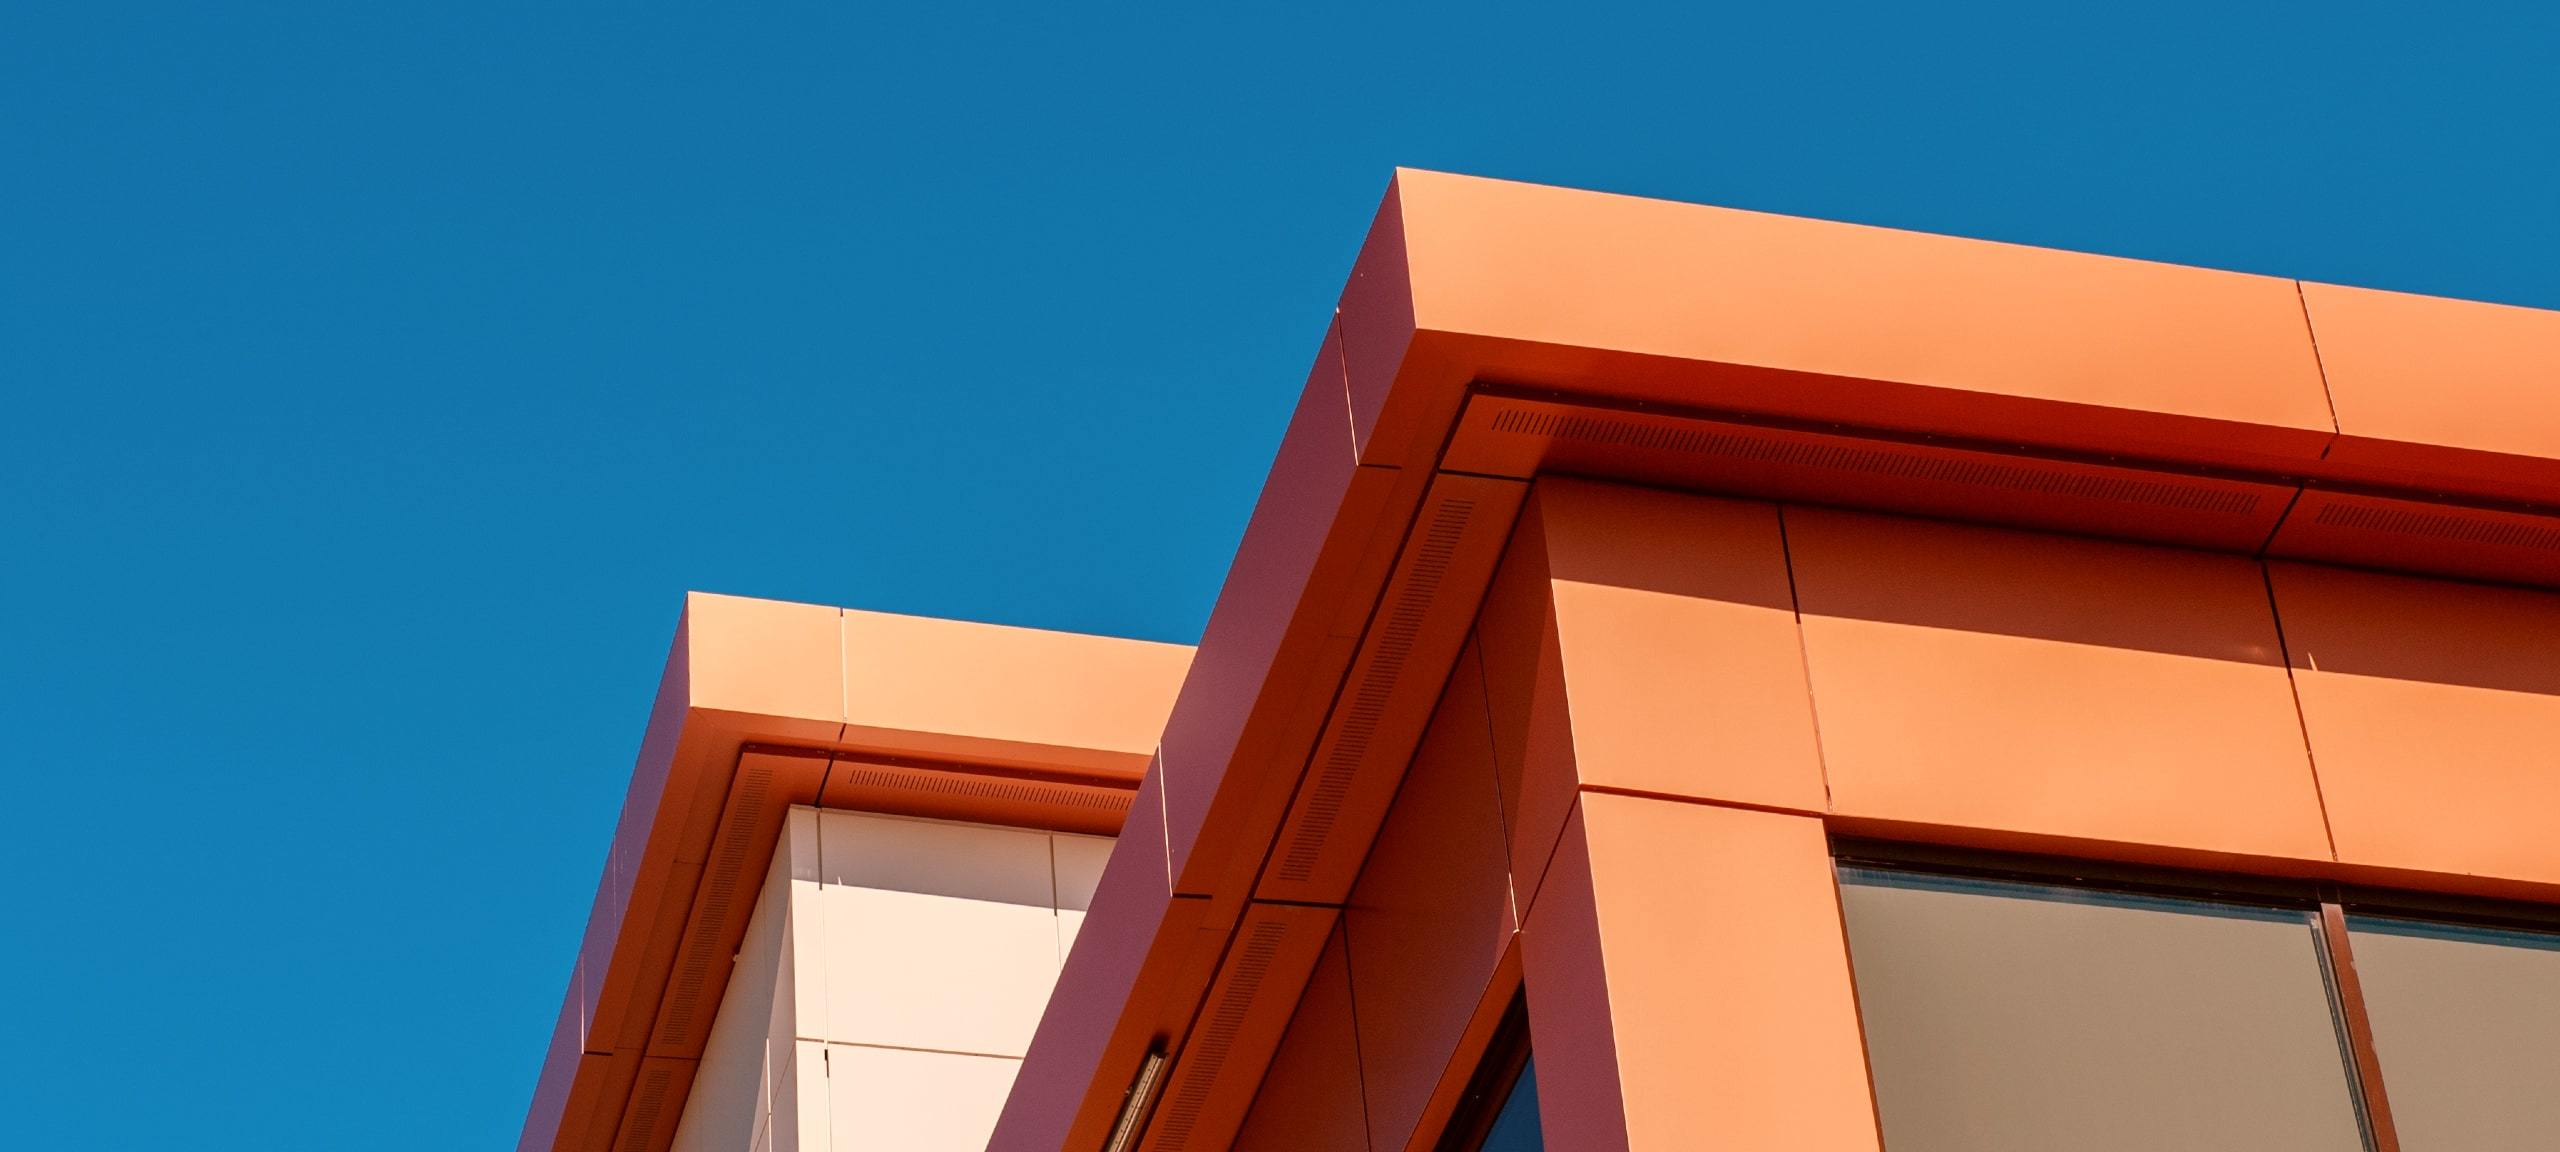 Contemporary architecture against blue sky